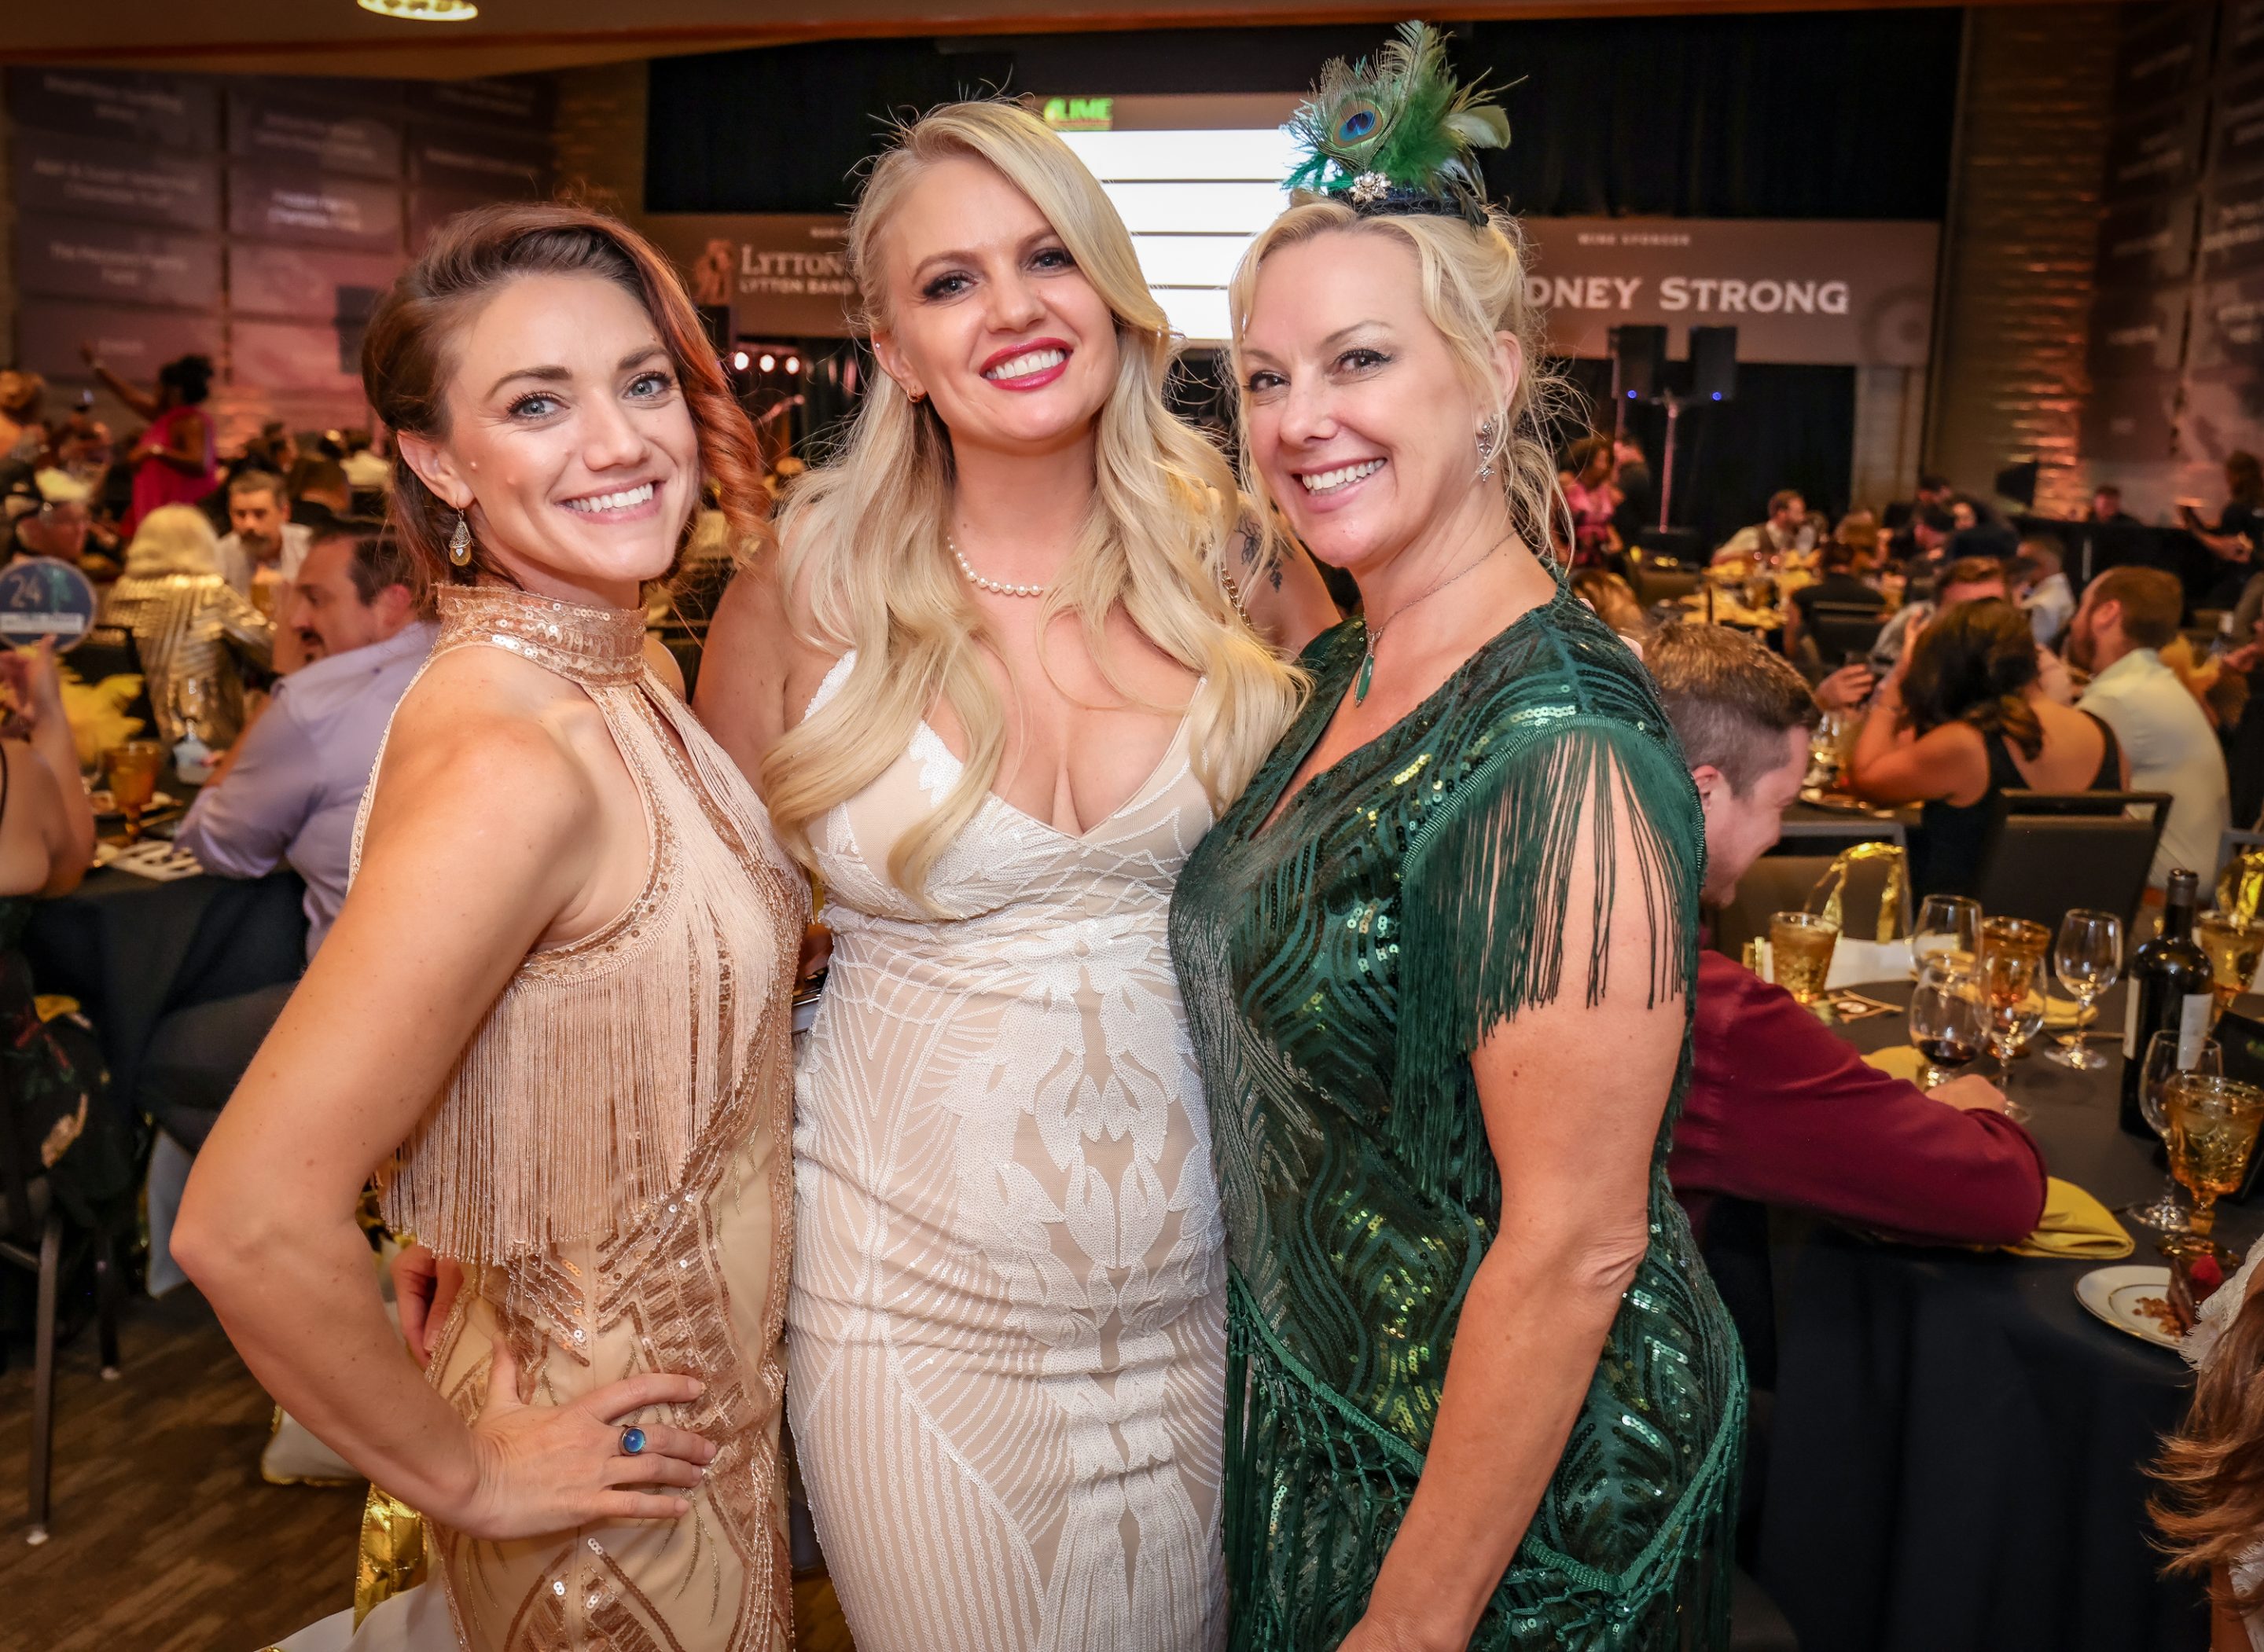 Three women posing for a photo at an event hosted by The LIME Foundation of Santa Rosa, a Sonoma County Non-Profit Organization.